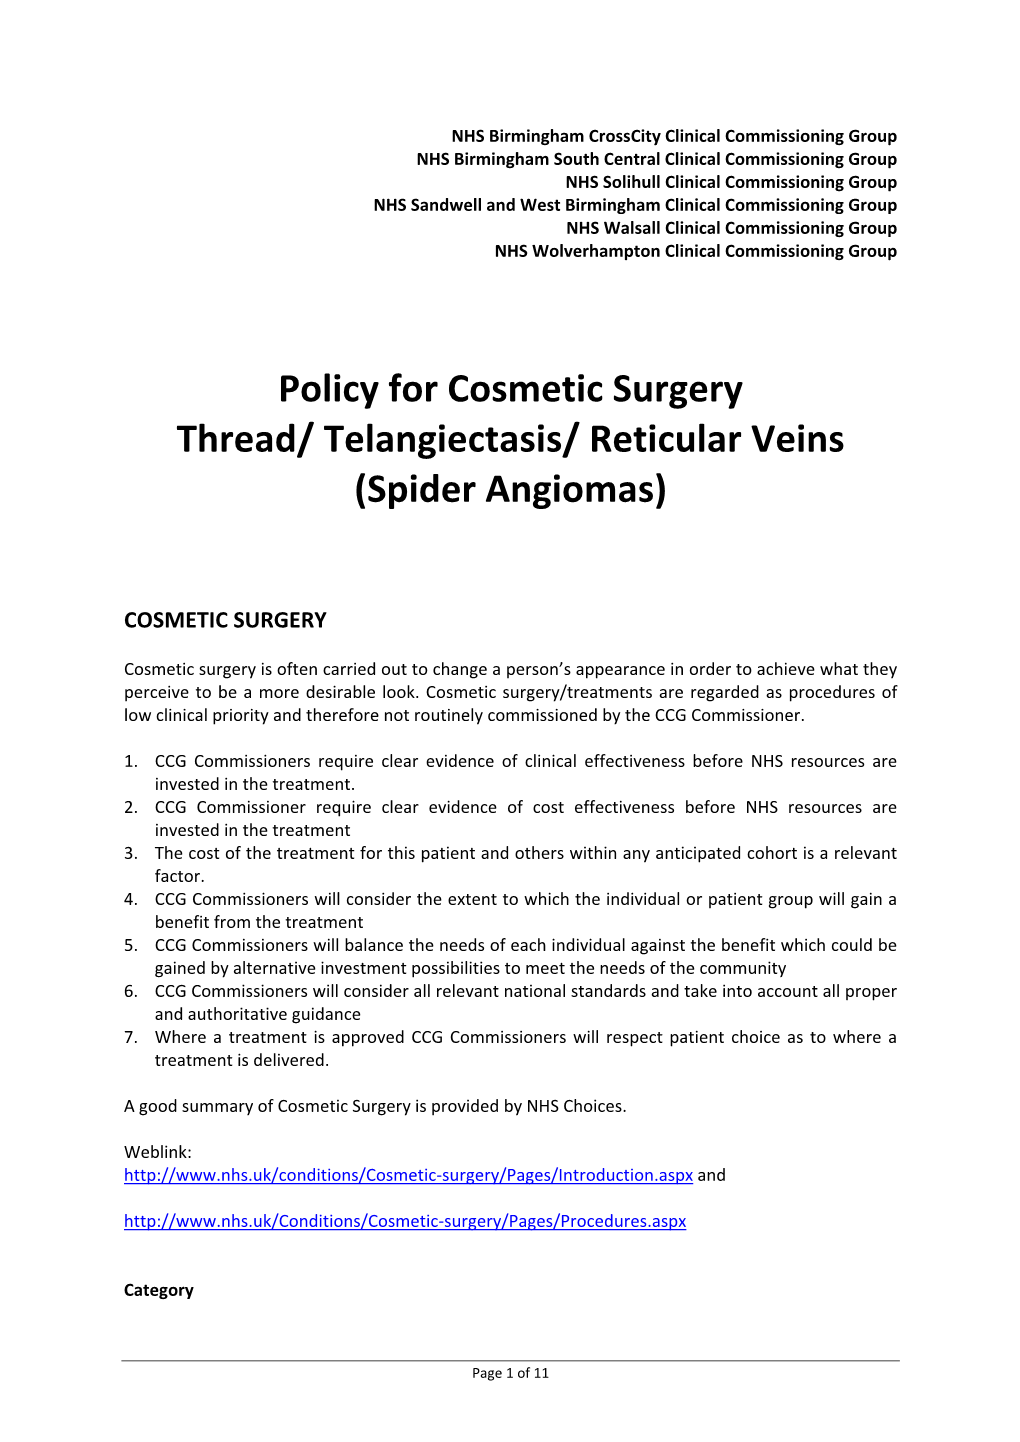 Policy for Cosmetic Surgery Thread/ Telangiectasis/ Reticular Veins (Spider Angiomas)